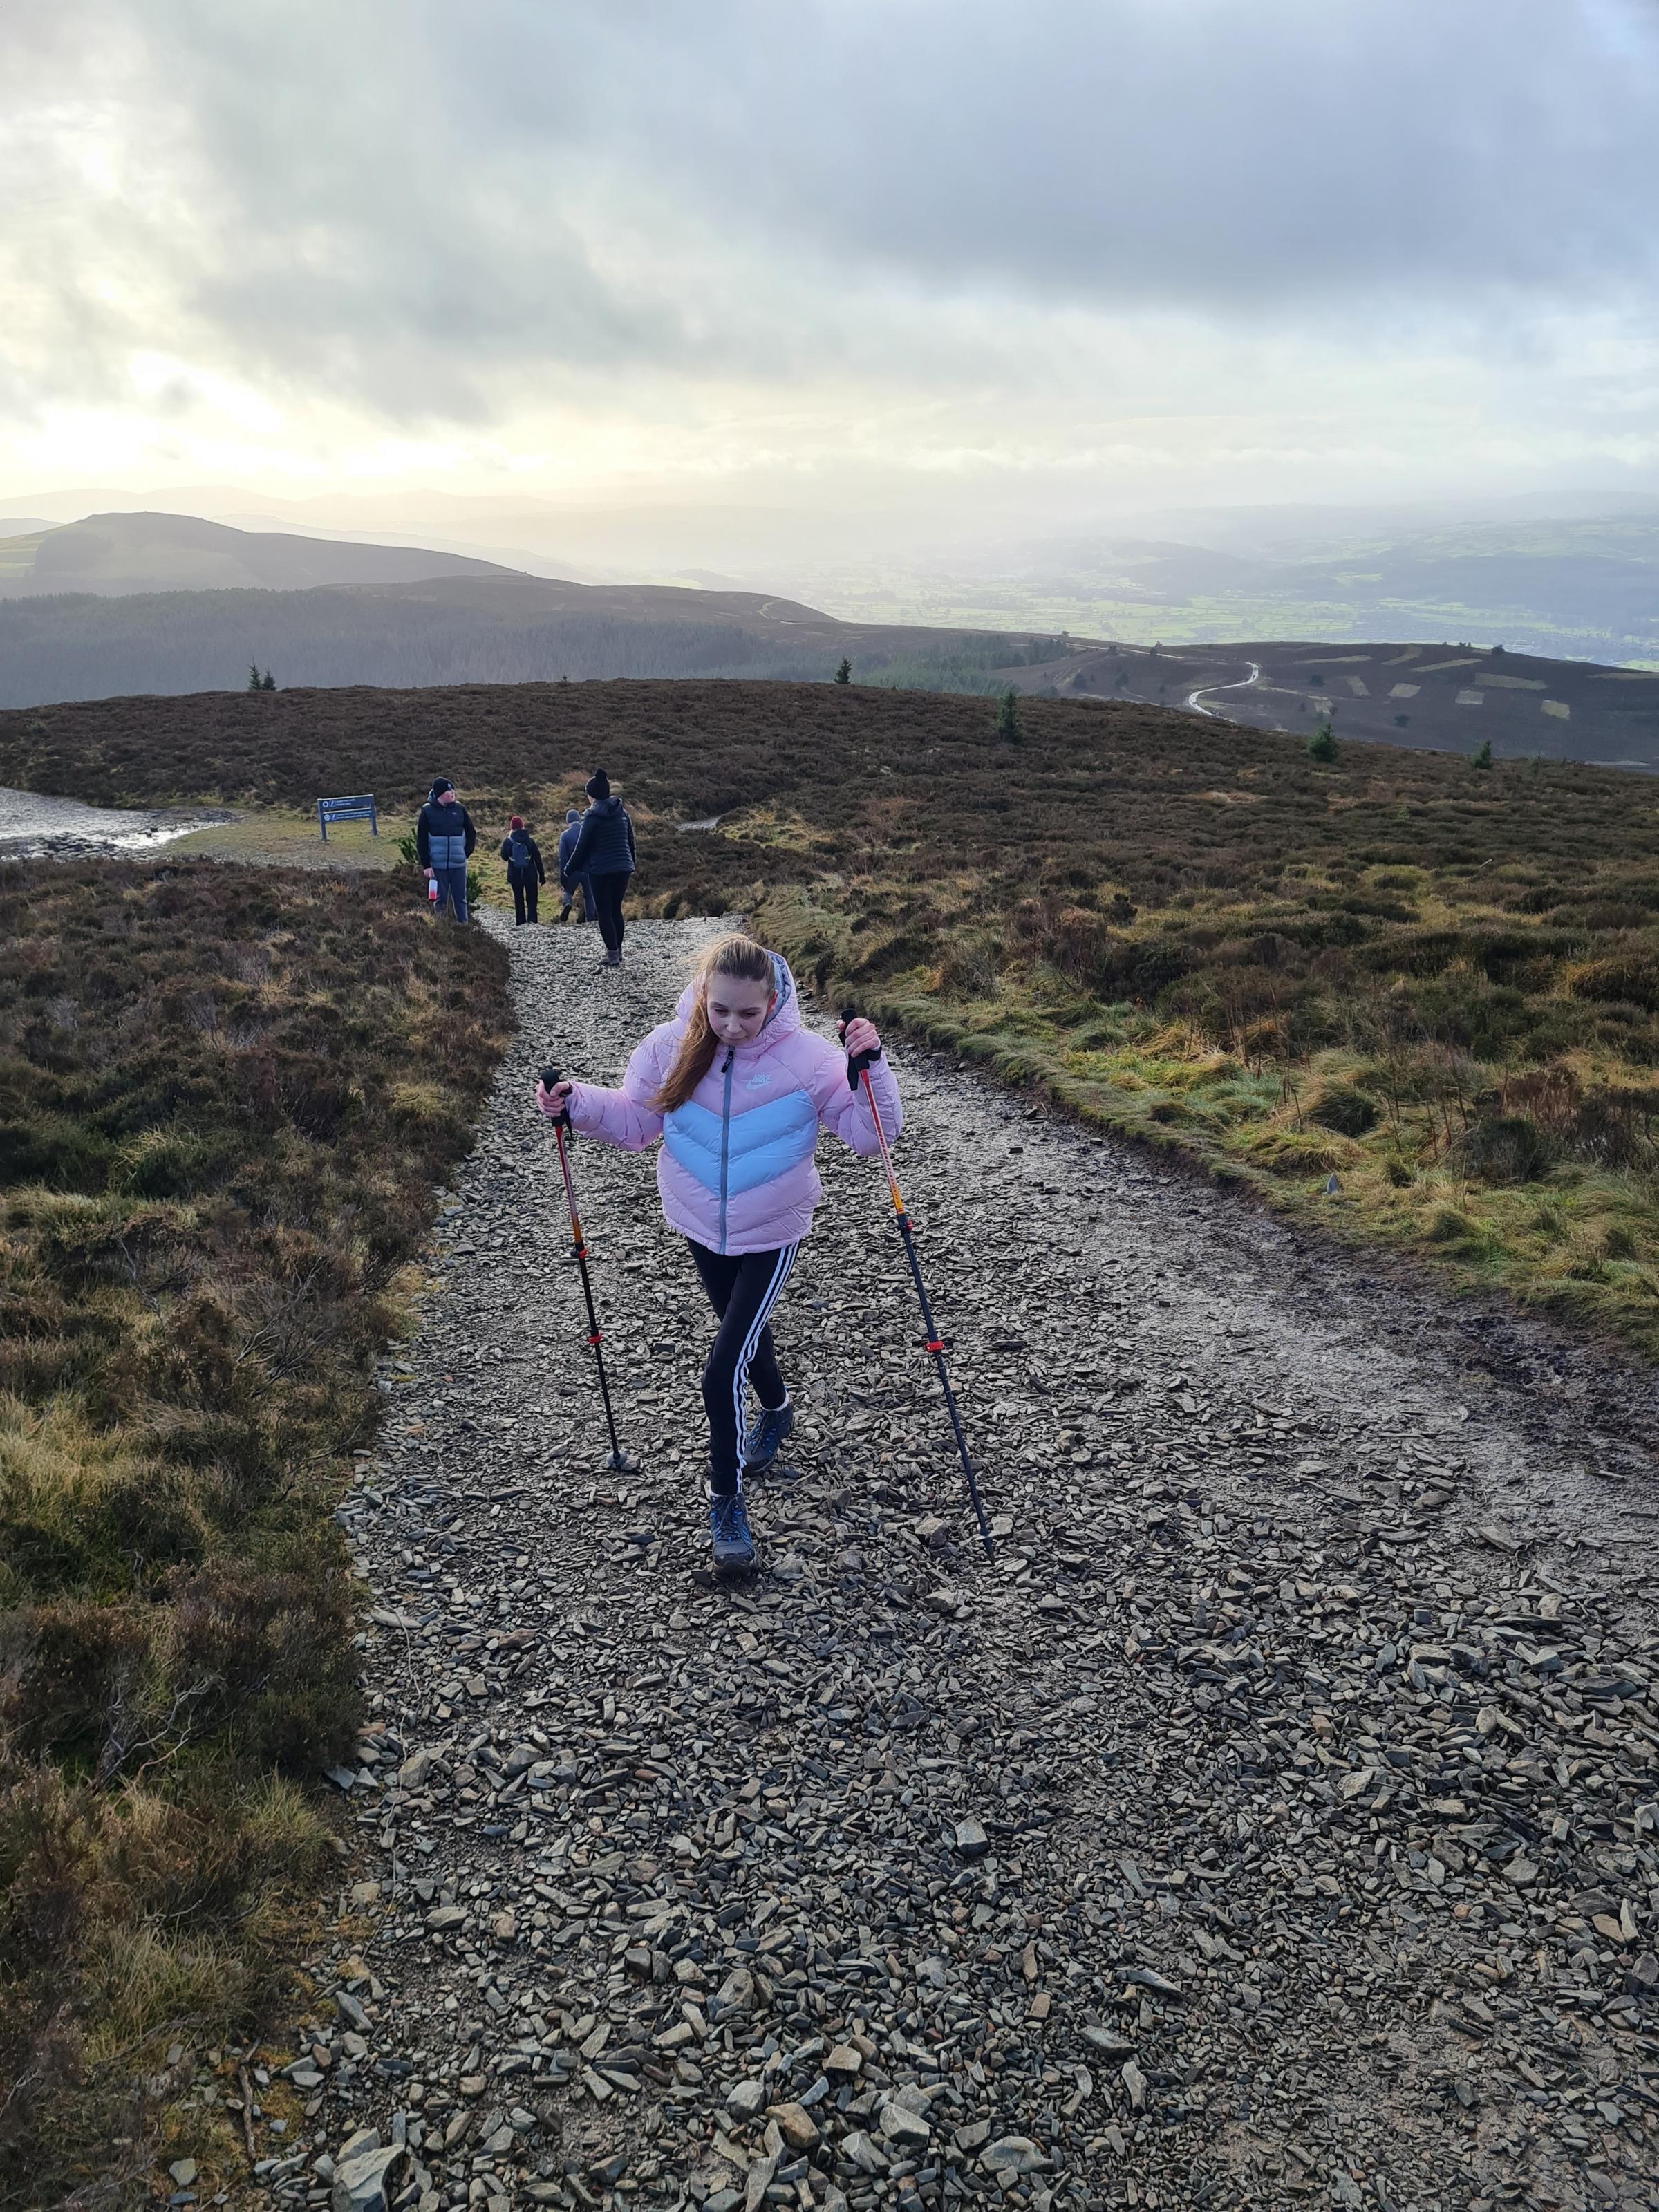 Olivia Phillips will be climbing Wales’s tallest mountain this month to raise money for the charity that helped her to walk.